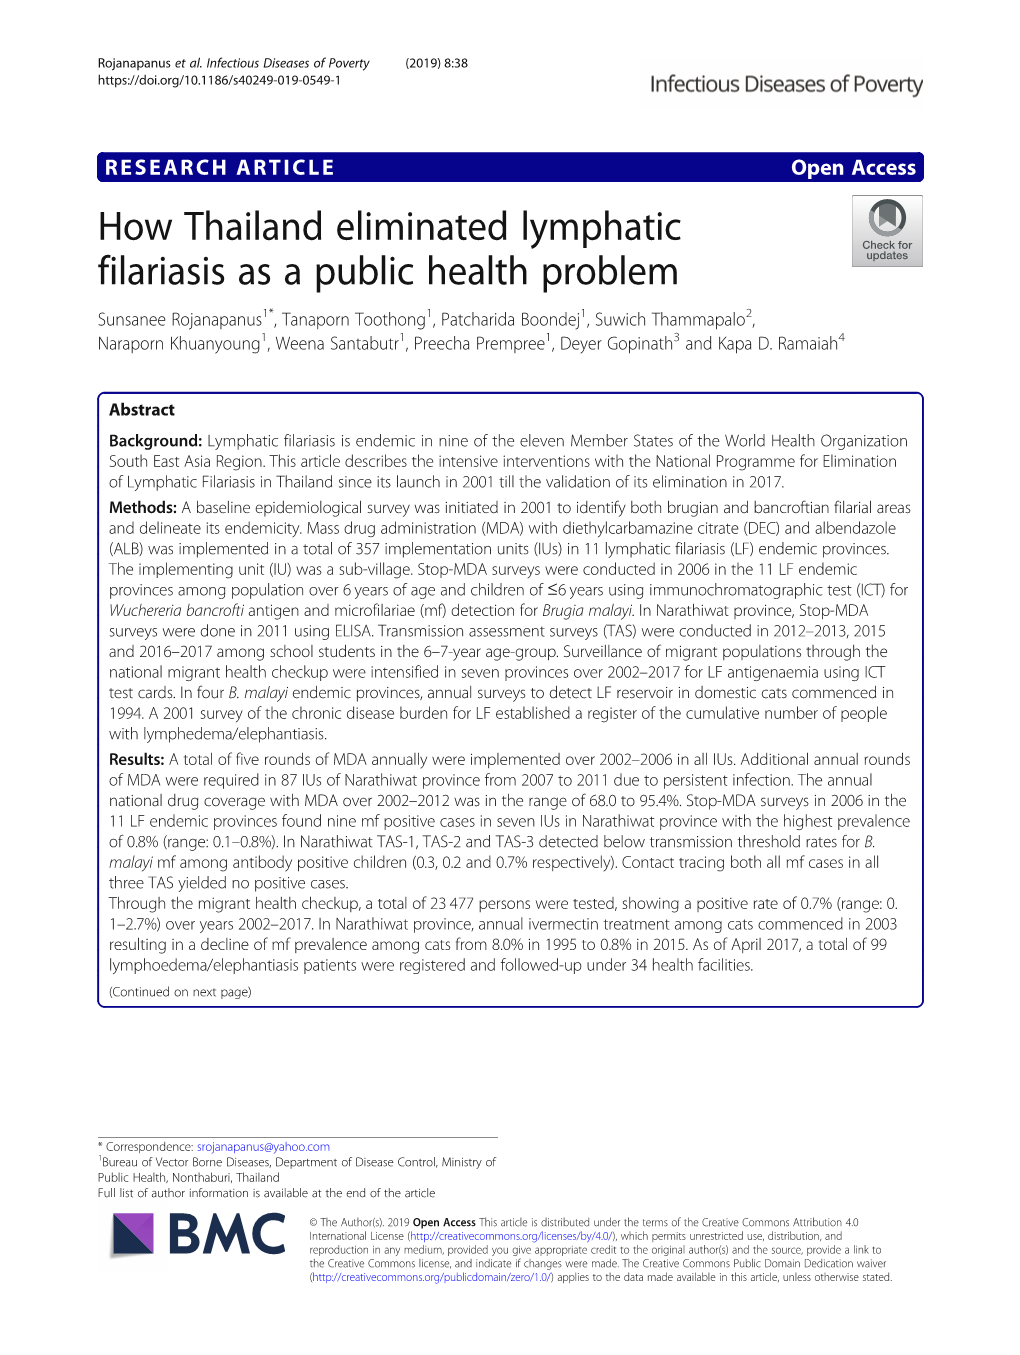 How Thailand Eliminated Lymphatic Filariasis As a Public Health Problem